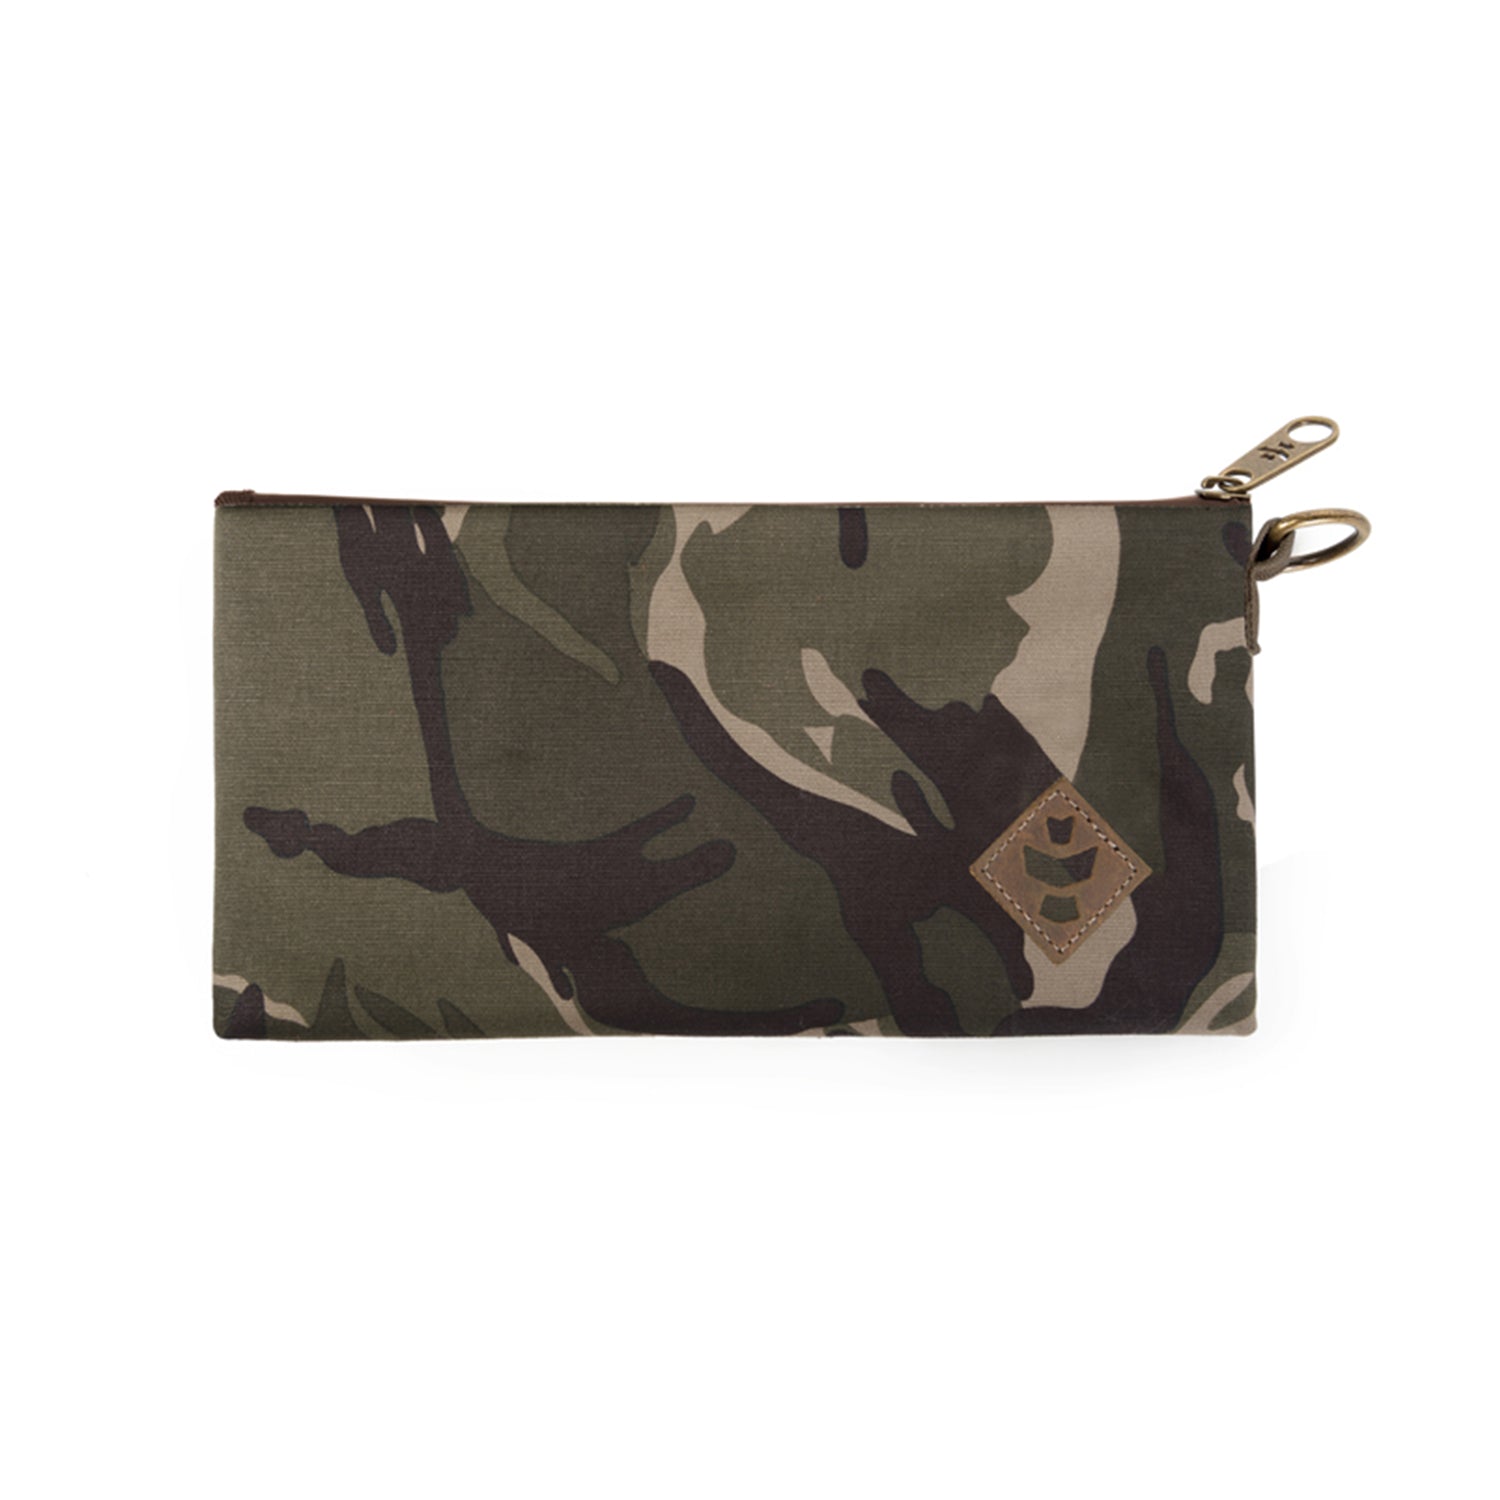 Camo Brown Canvas Smell Proof Water Resistant Zipper Bank Bag